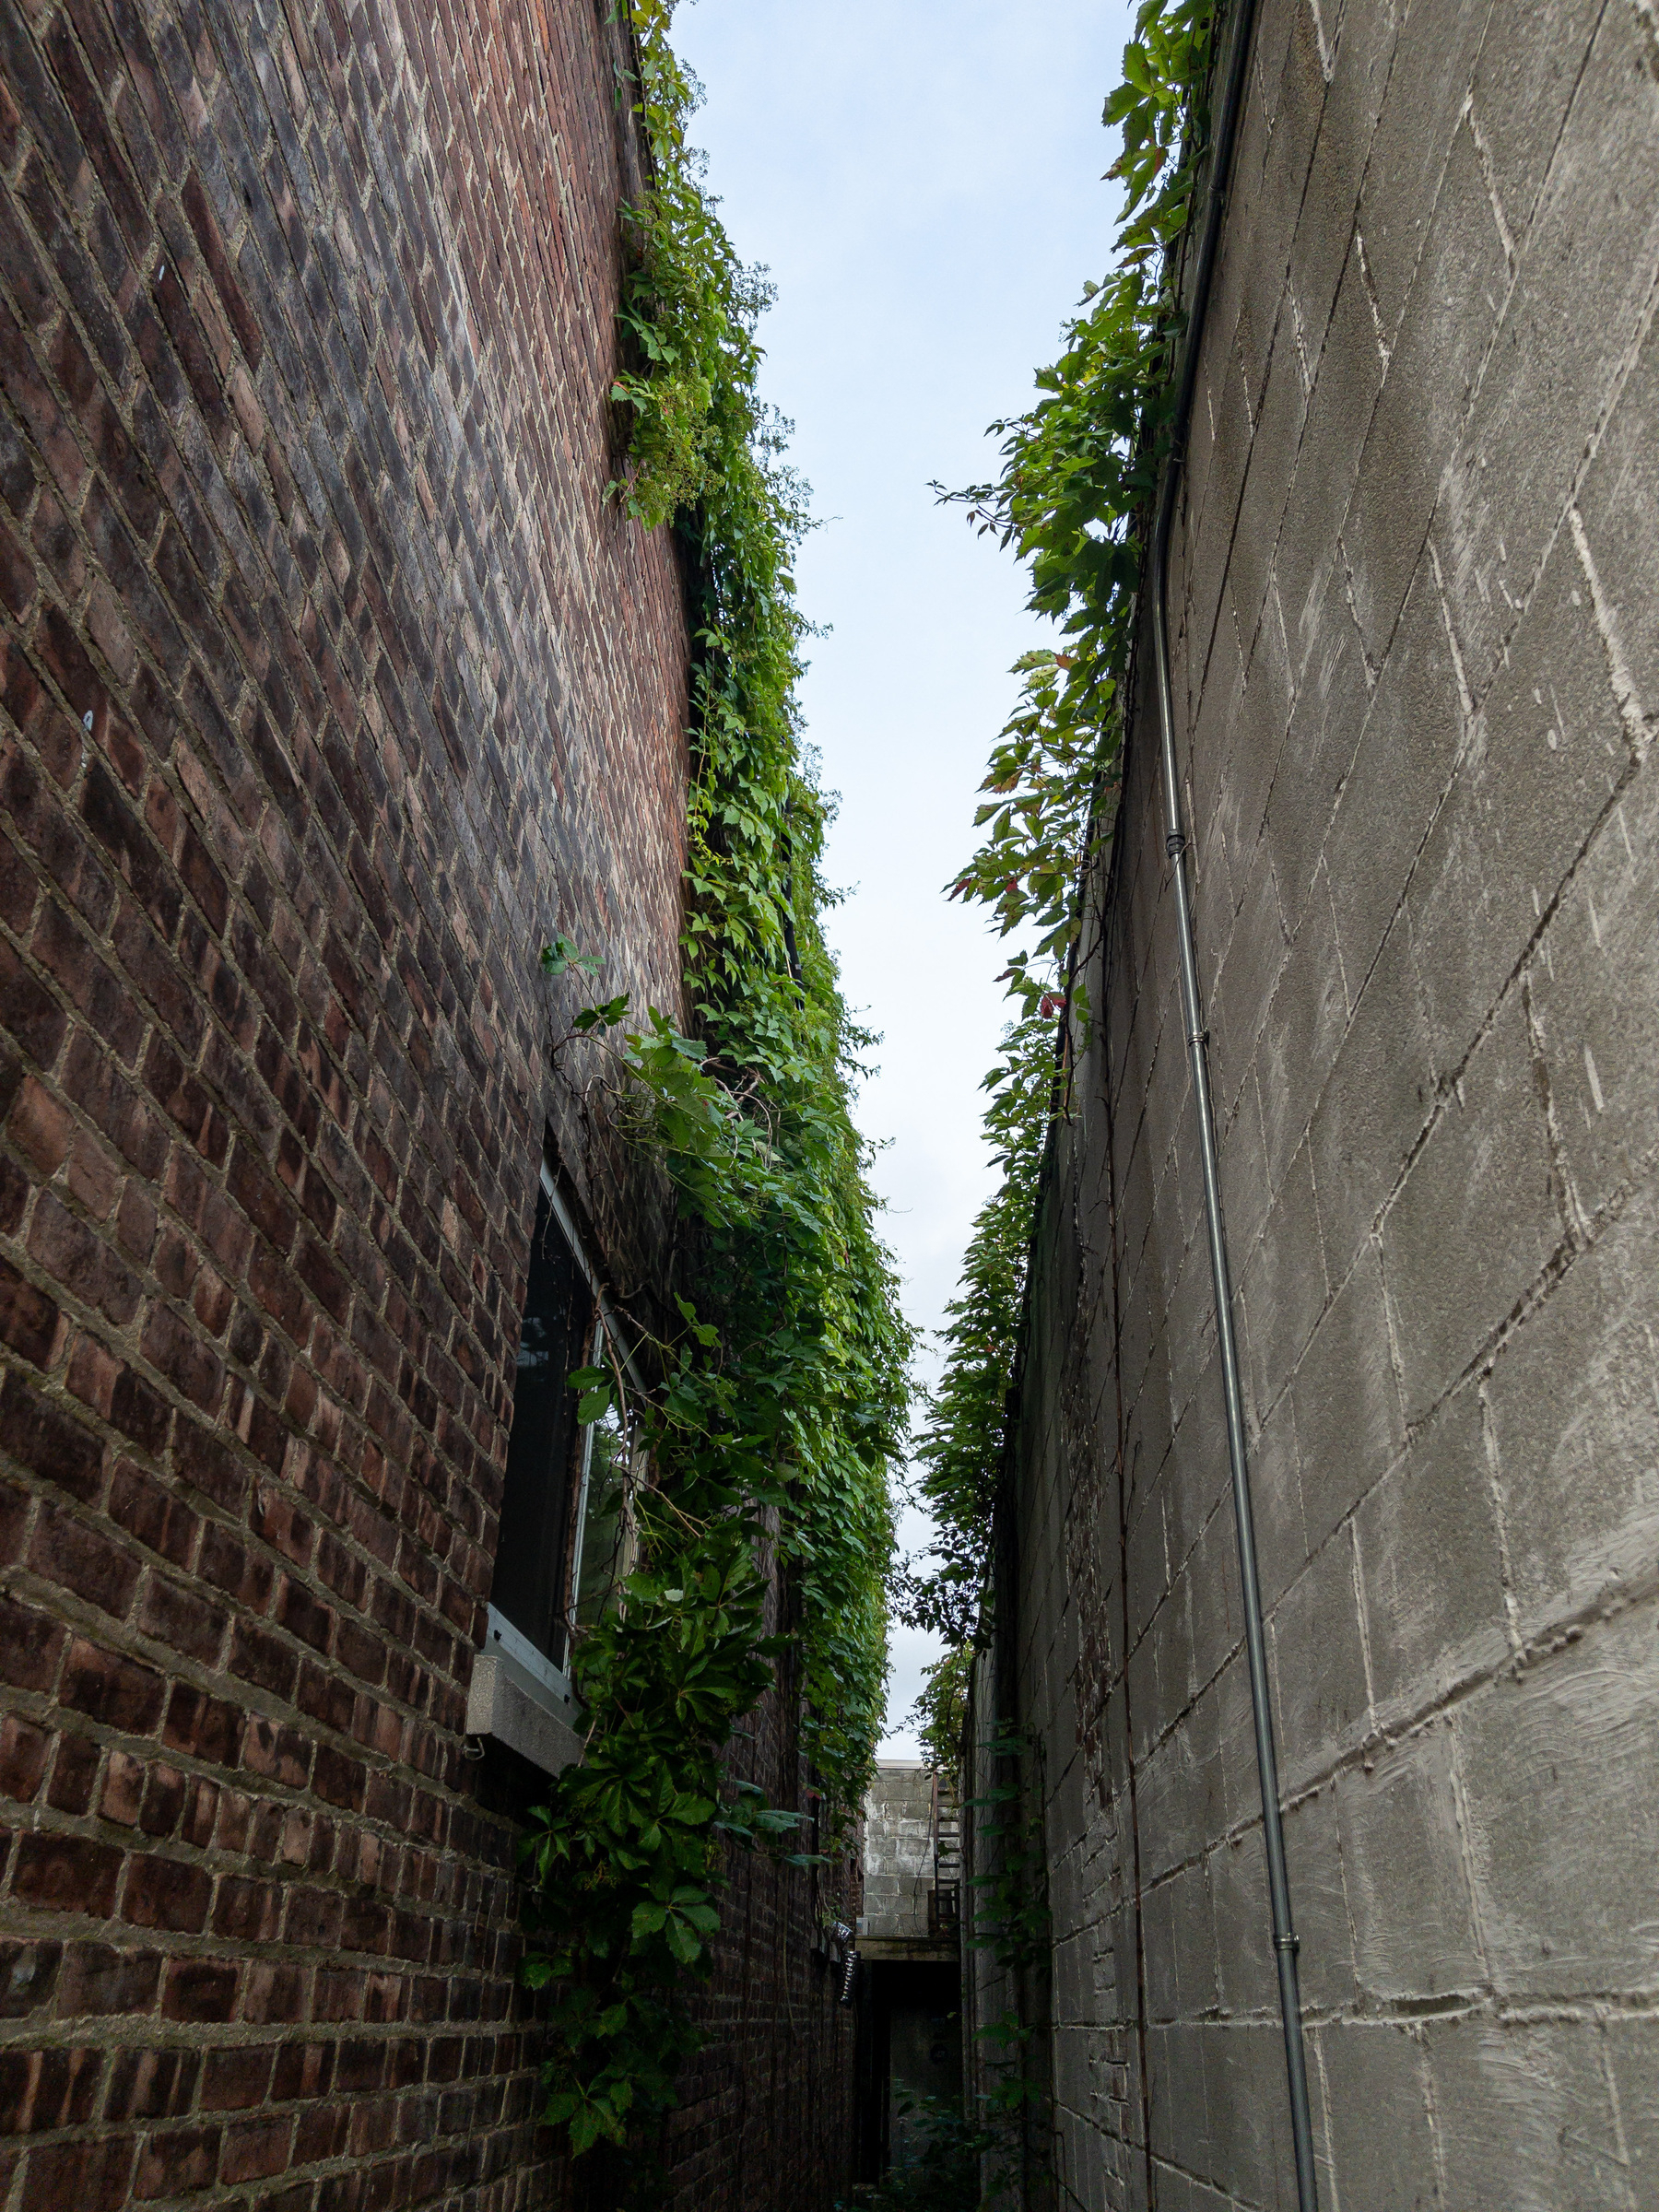 Sliver of sky between two buildings with vines growing up their walls.